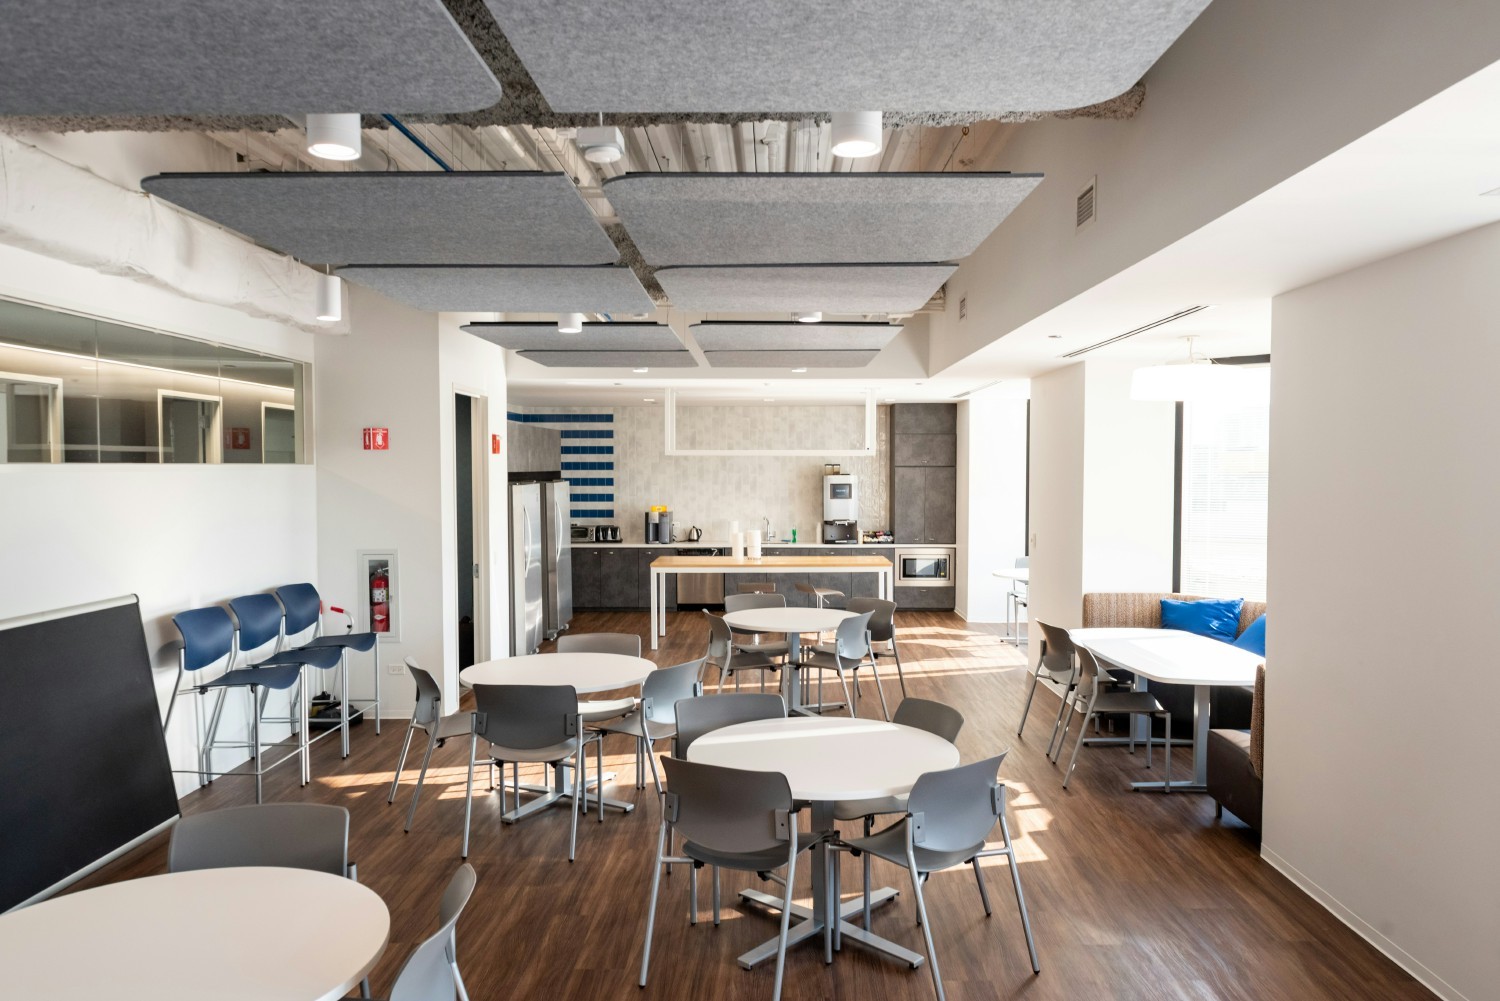 CTPF moved into their new office space in Chicago's south loop  at the end of 2019, in a building with many amenities.